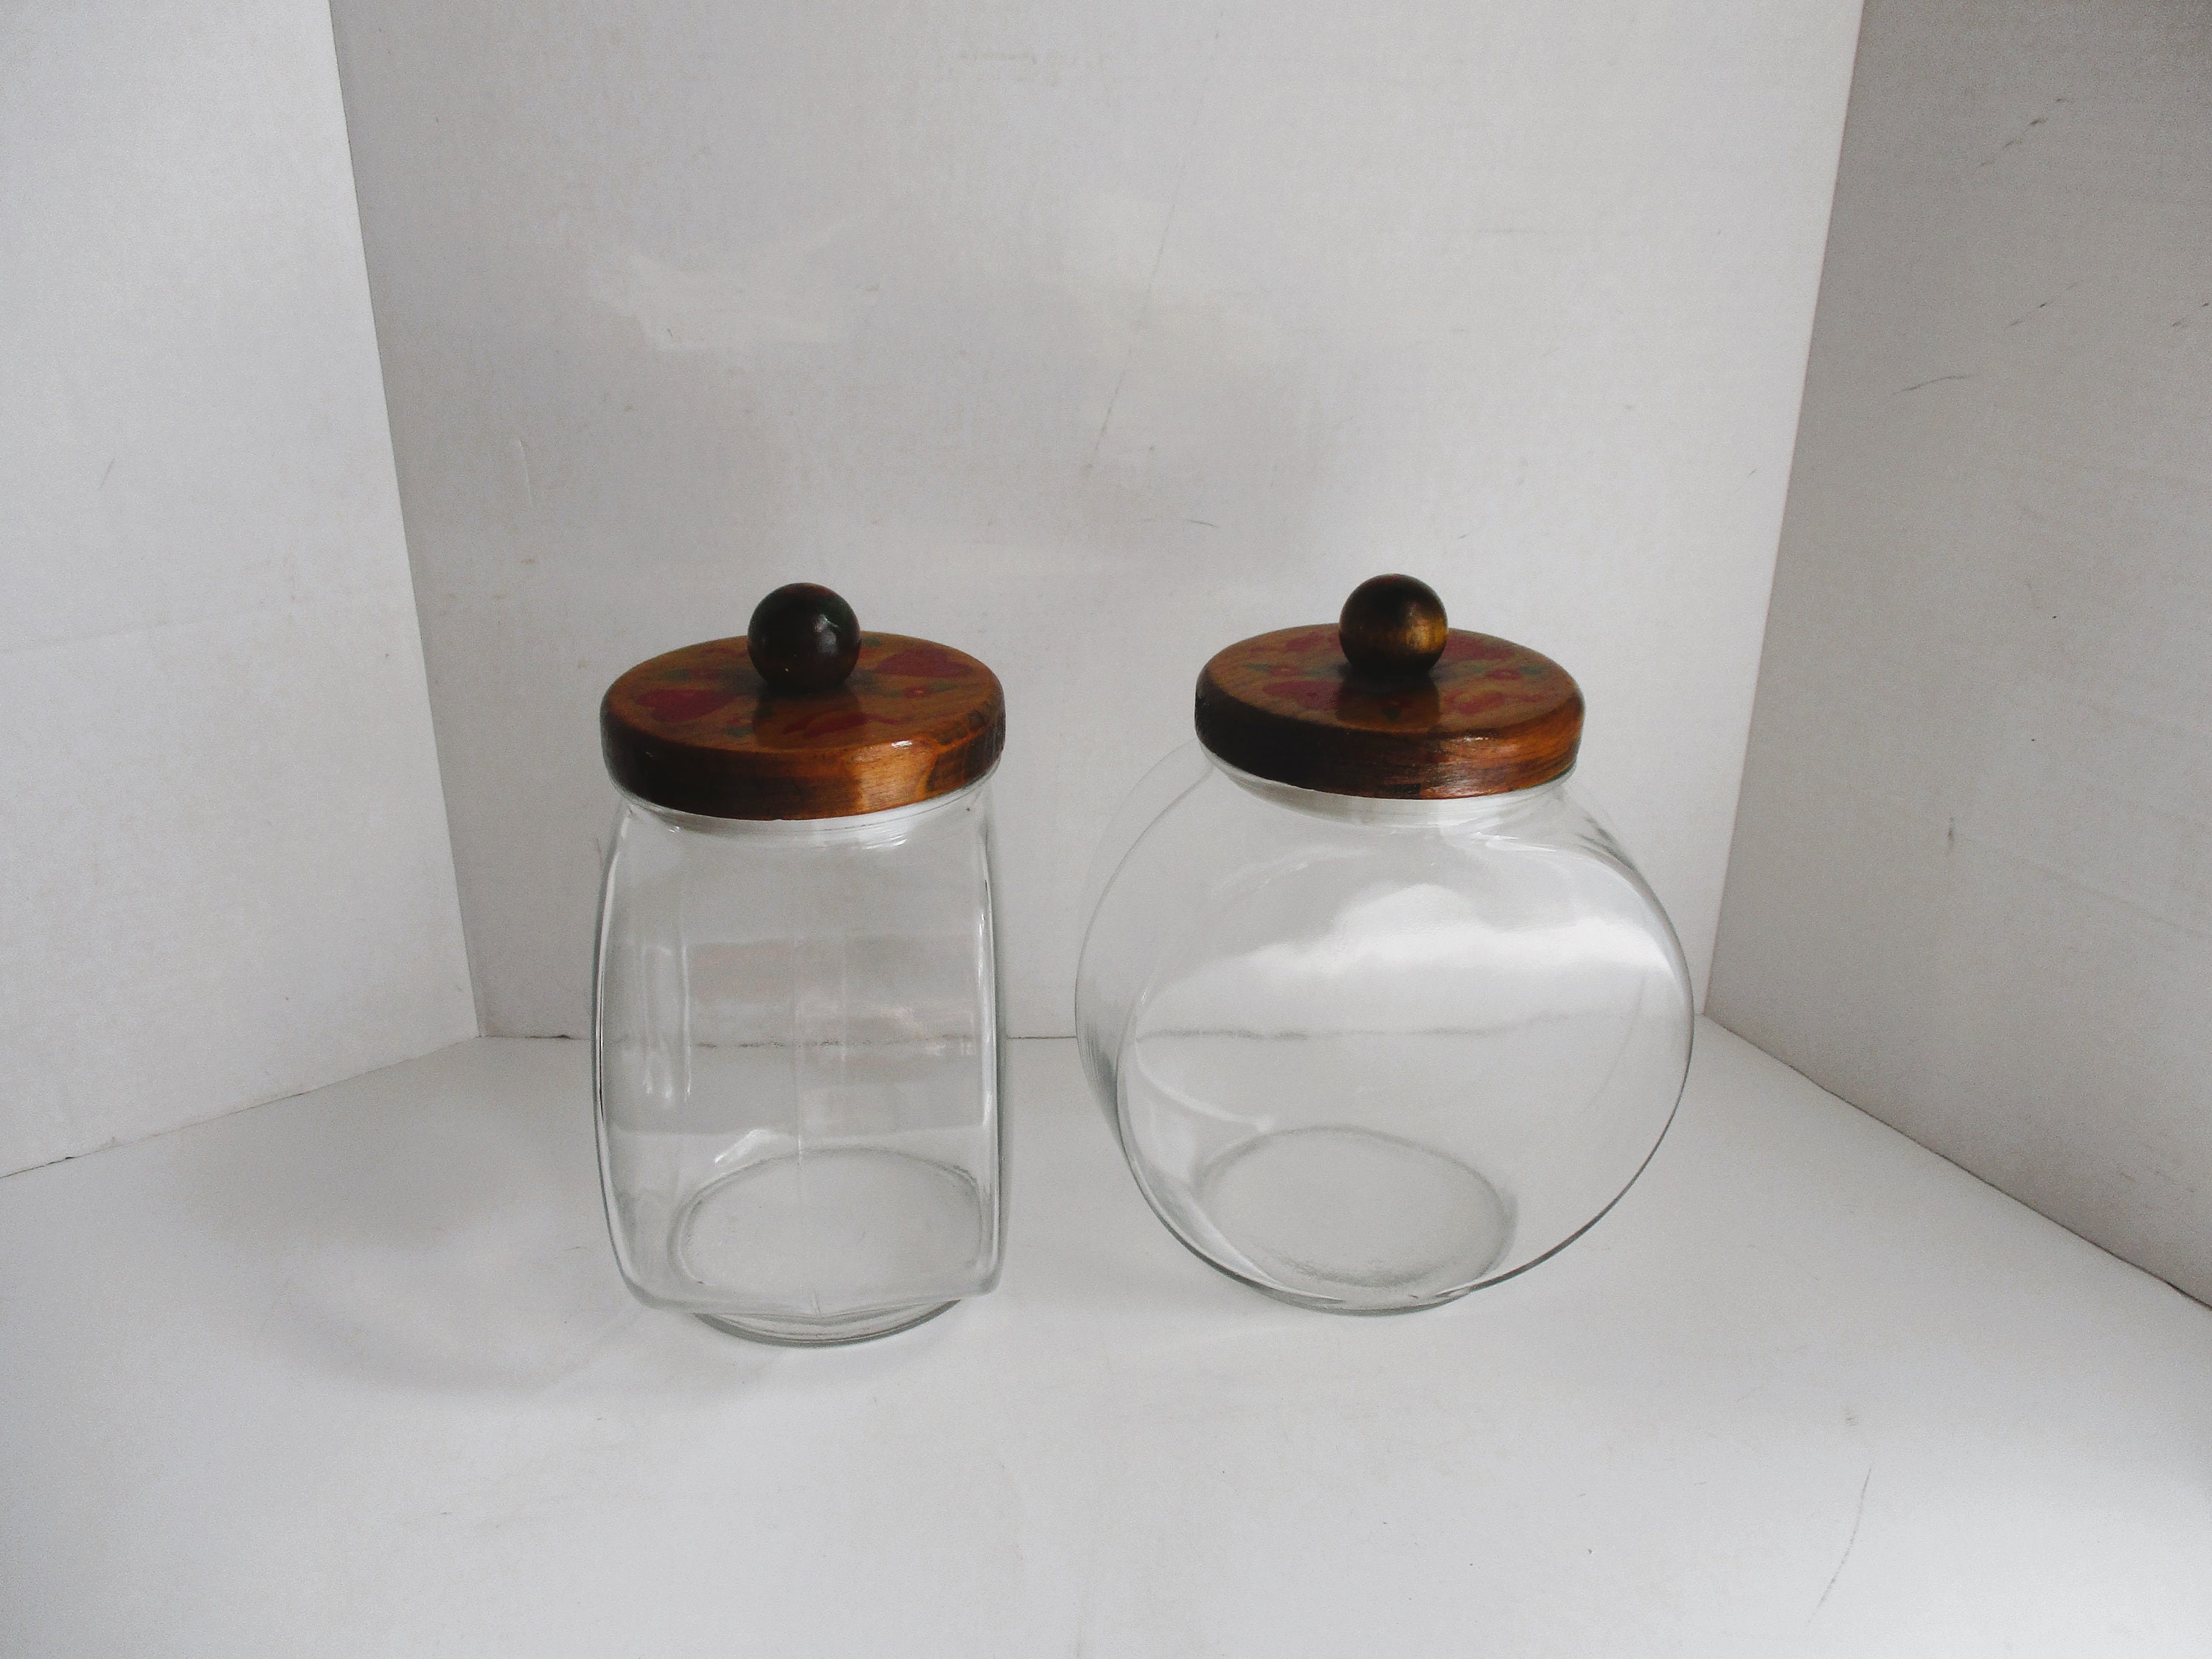 Sweejar Large Glass Candy Jars with Wooden Lids, 1.2 Gallon Glass